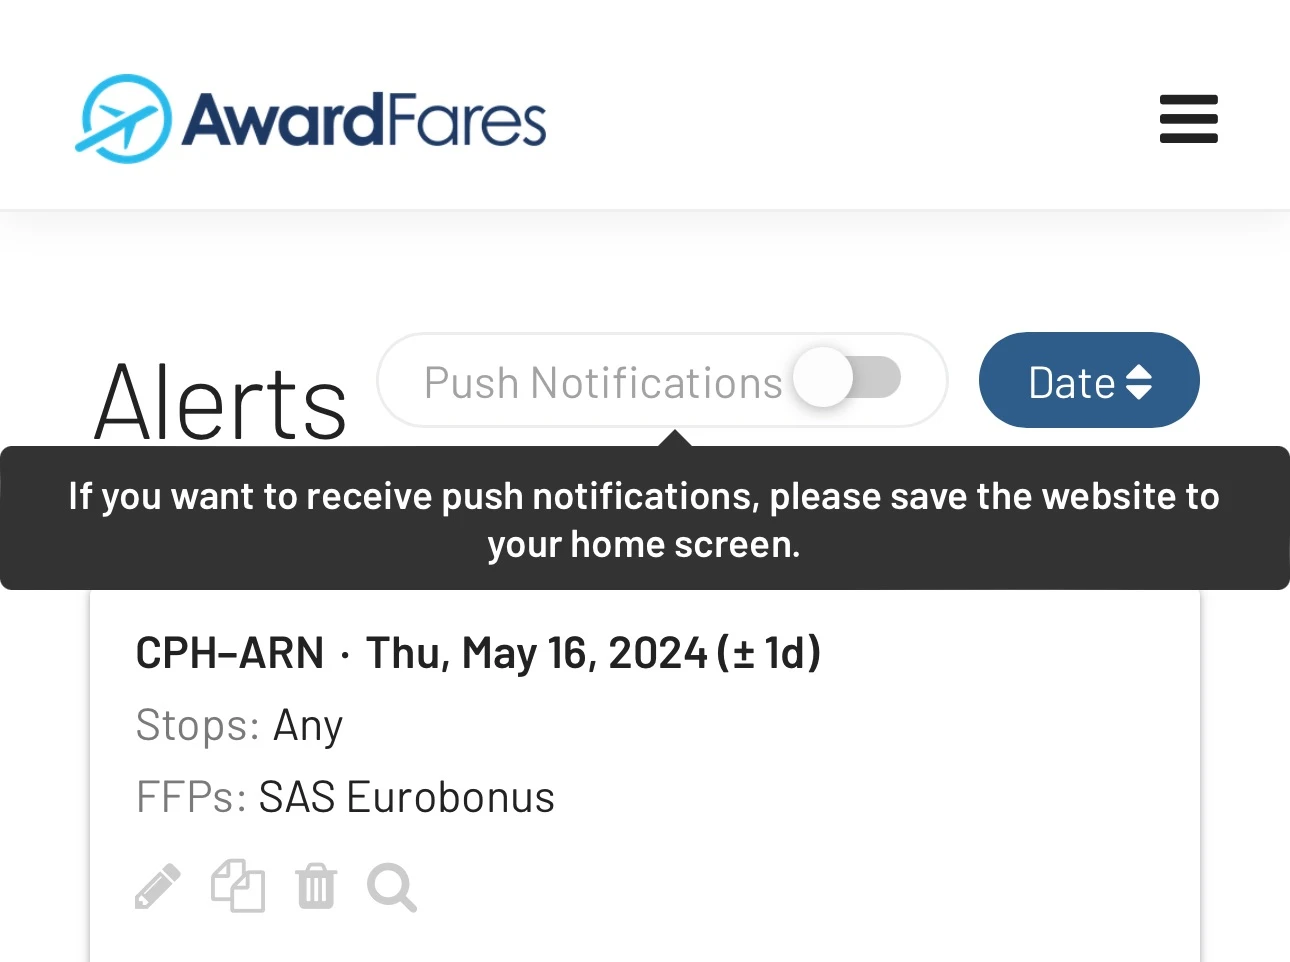 How to enable push notifications for award flights on mobile (AwardFares).